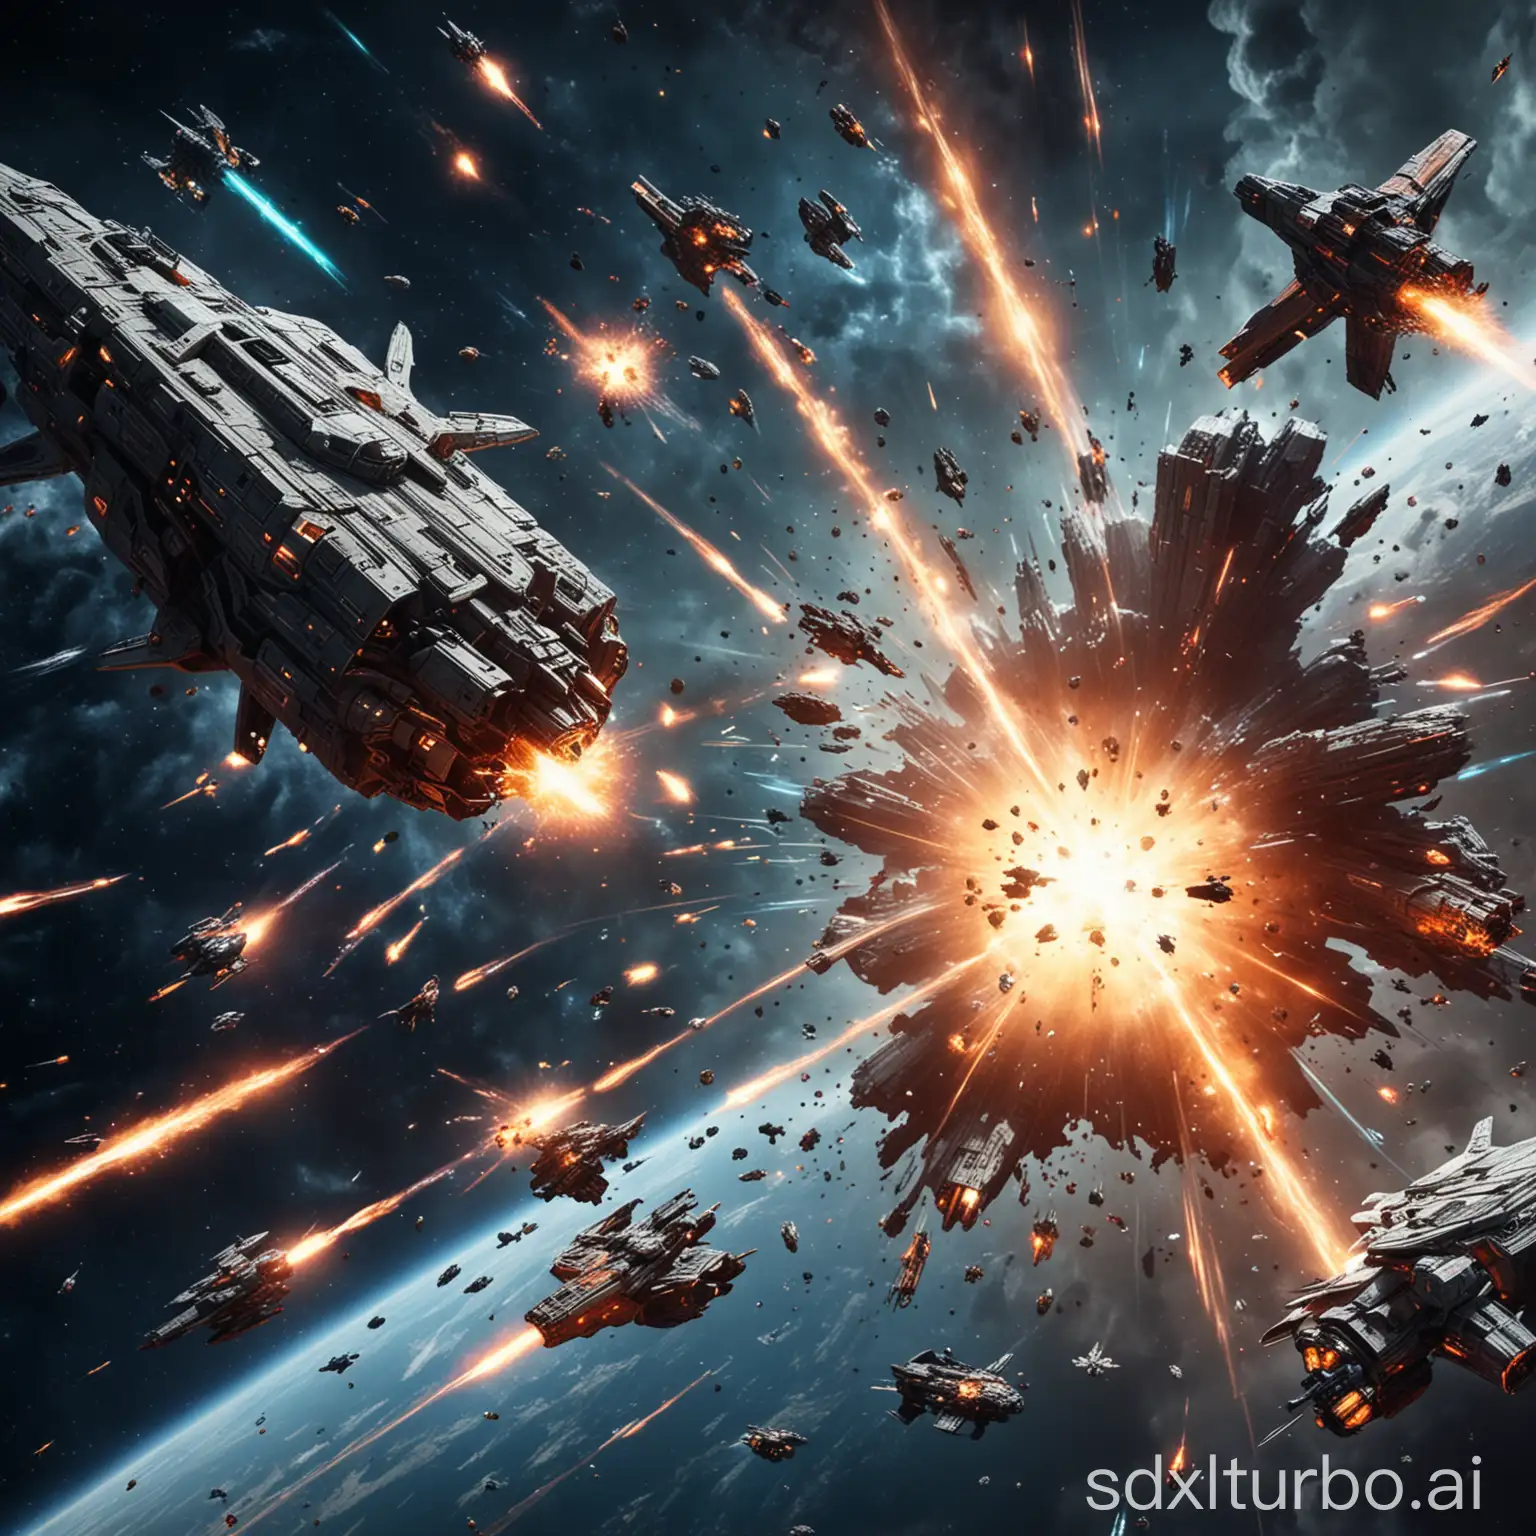 space battle, lots of space ships, explosions and lasers